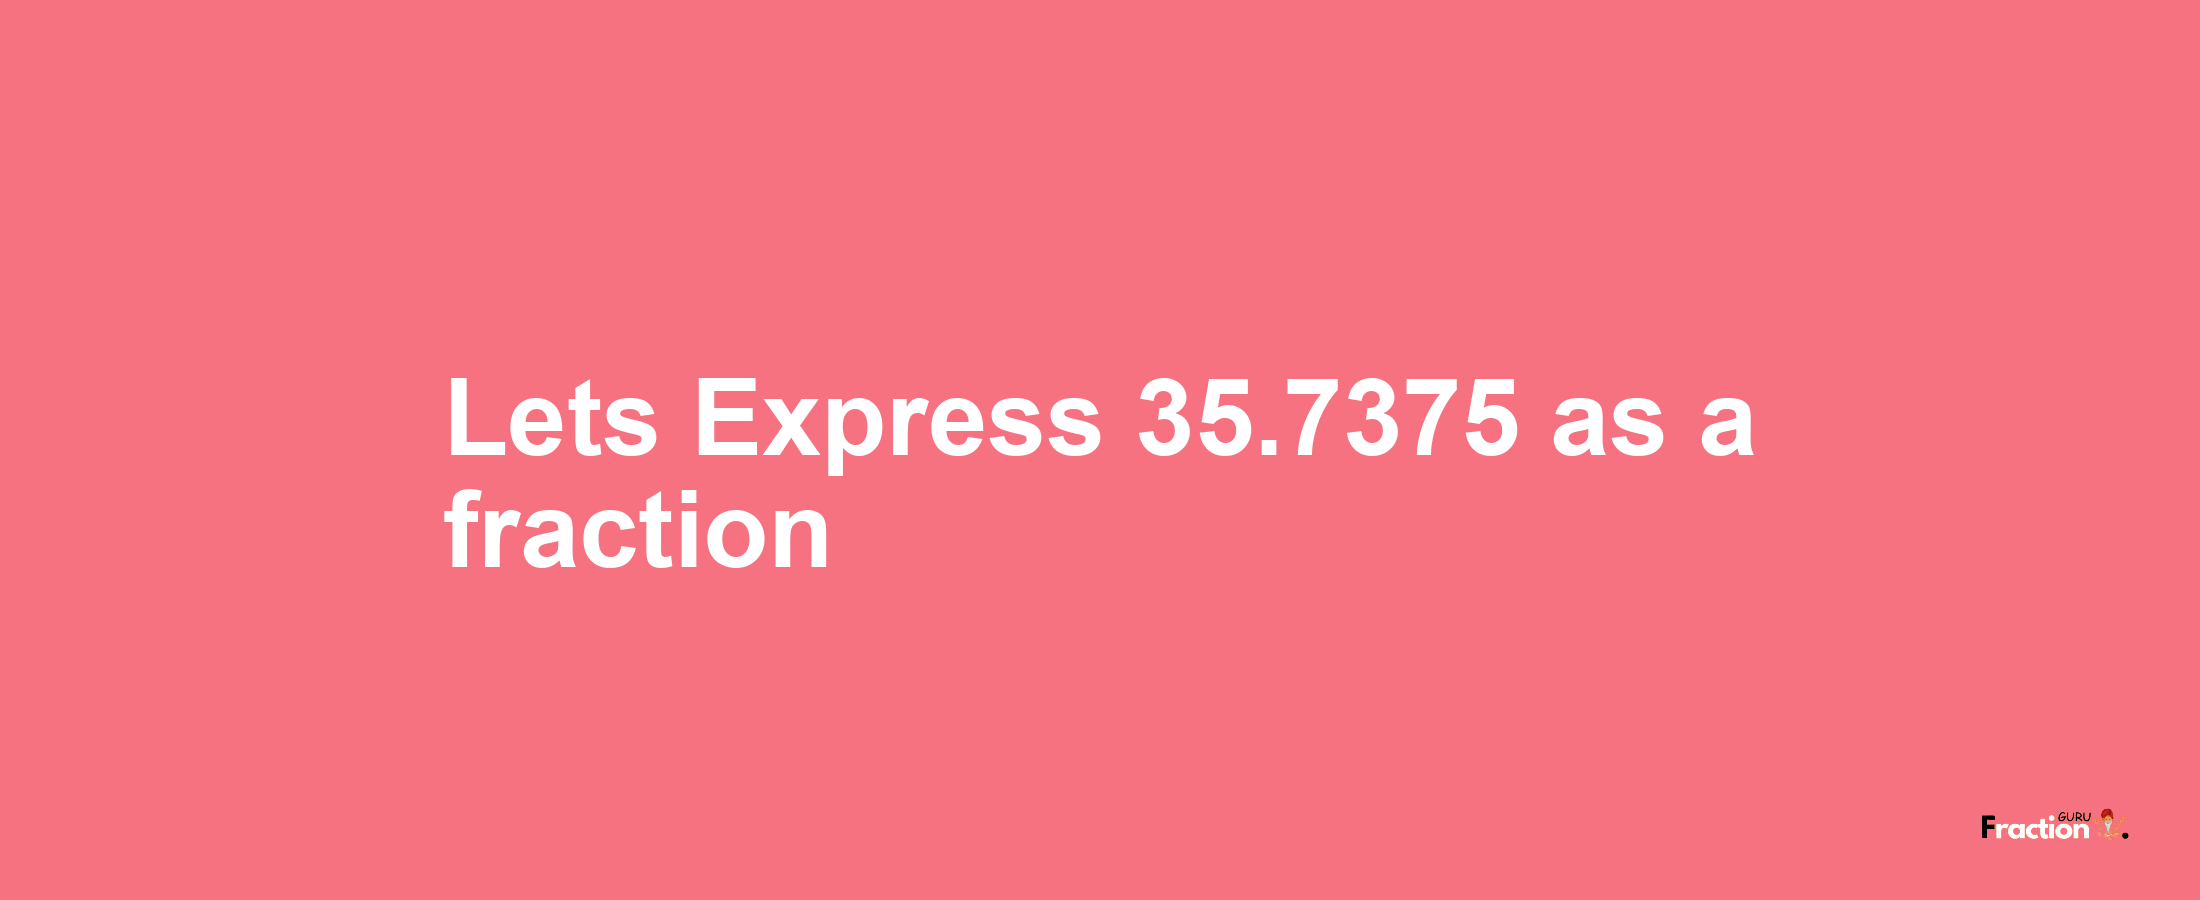 Lets Express 35.7375 as afraction